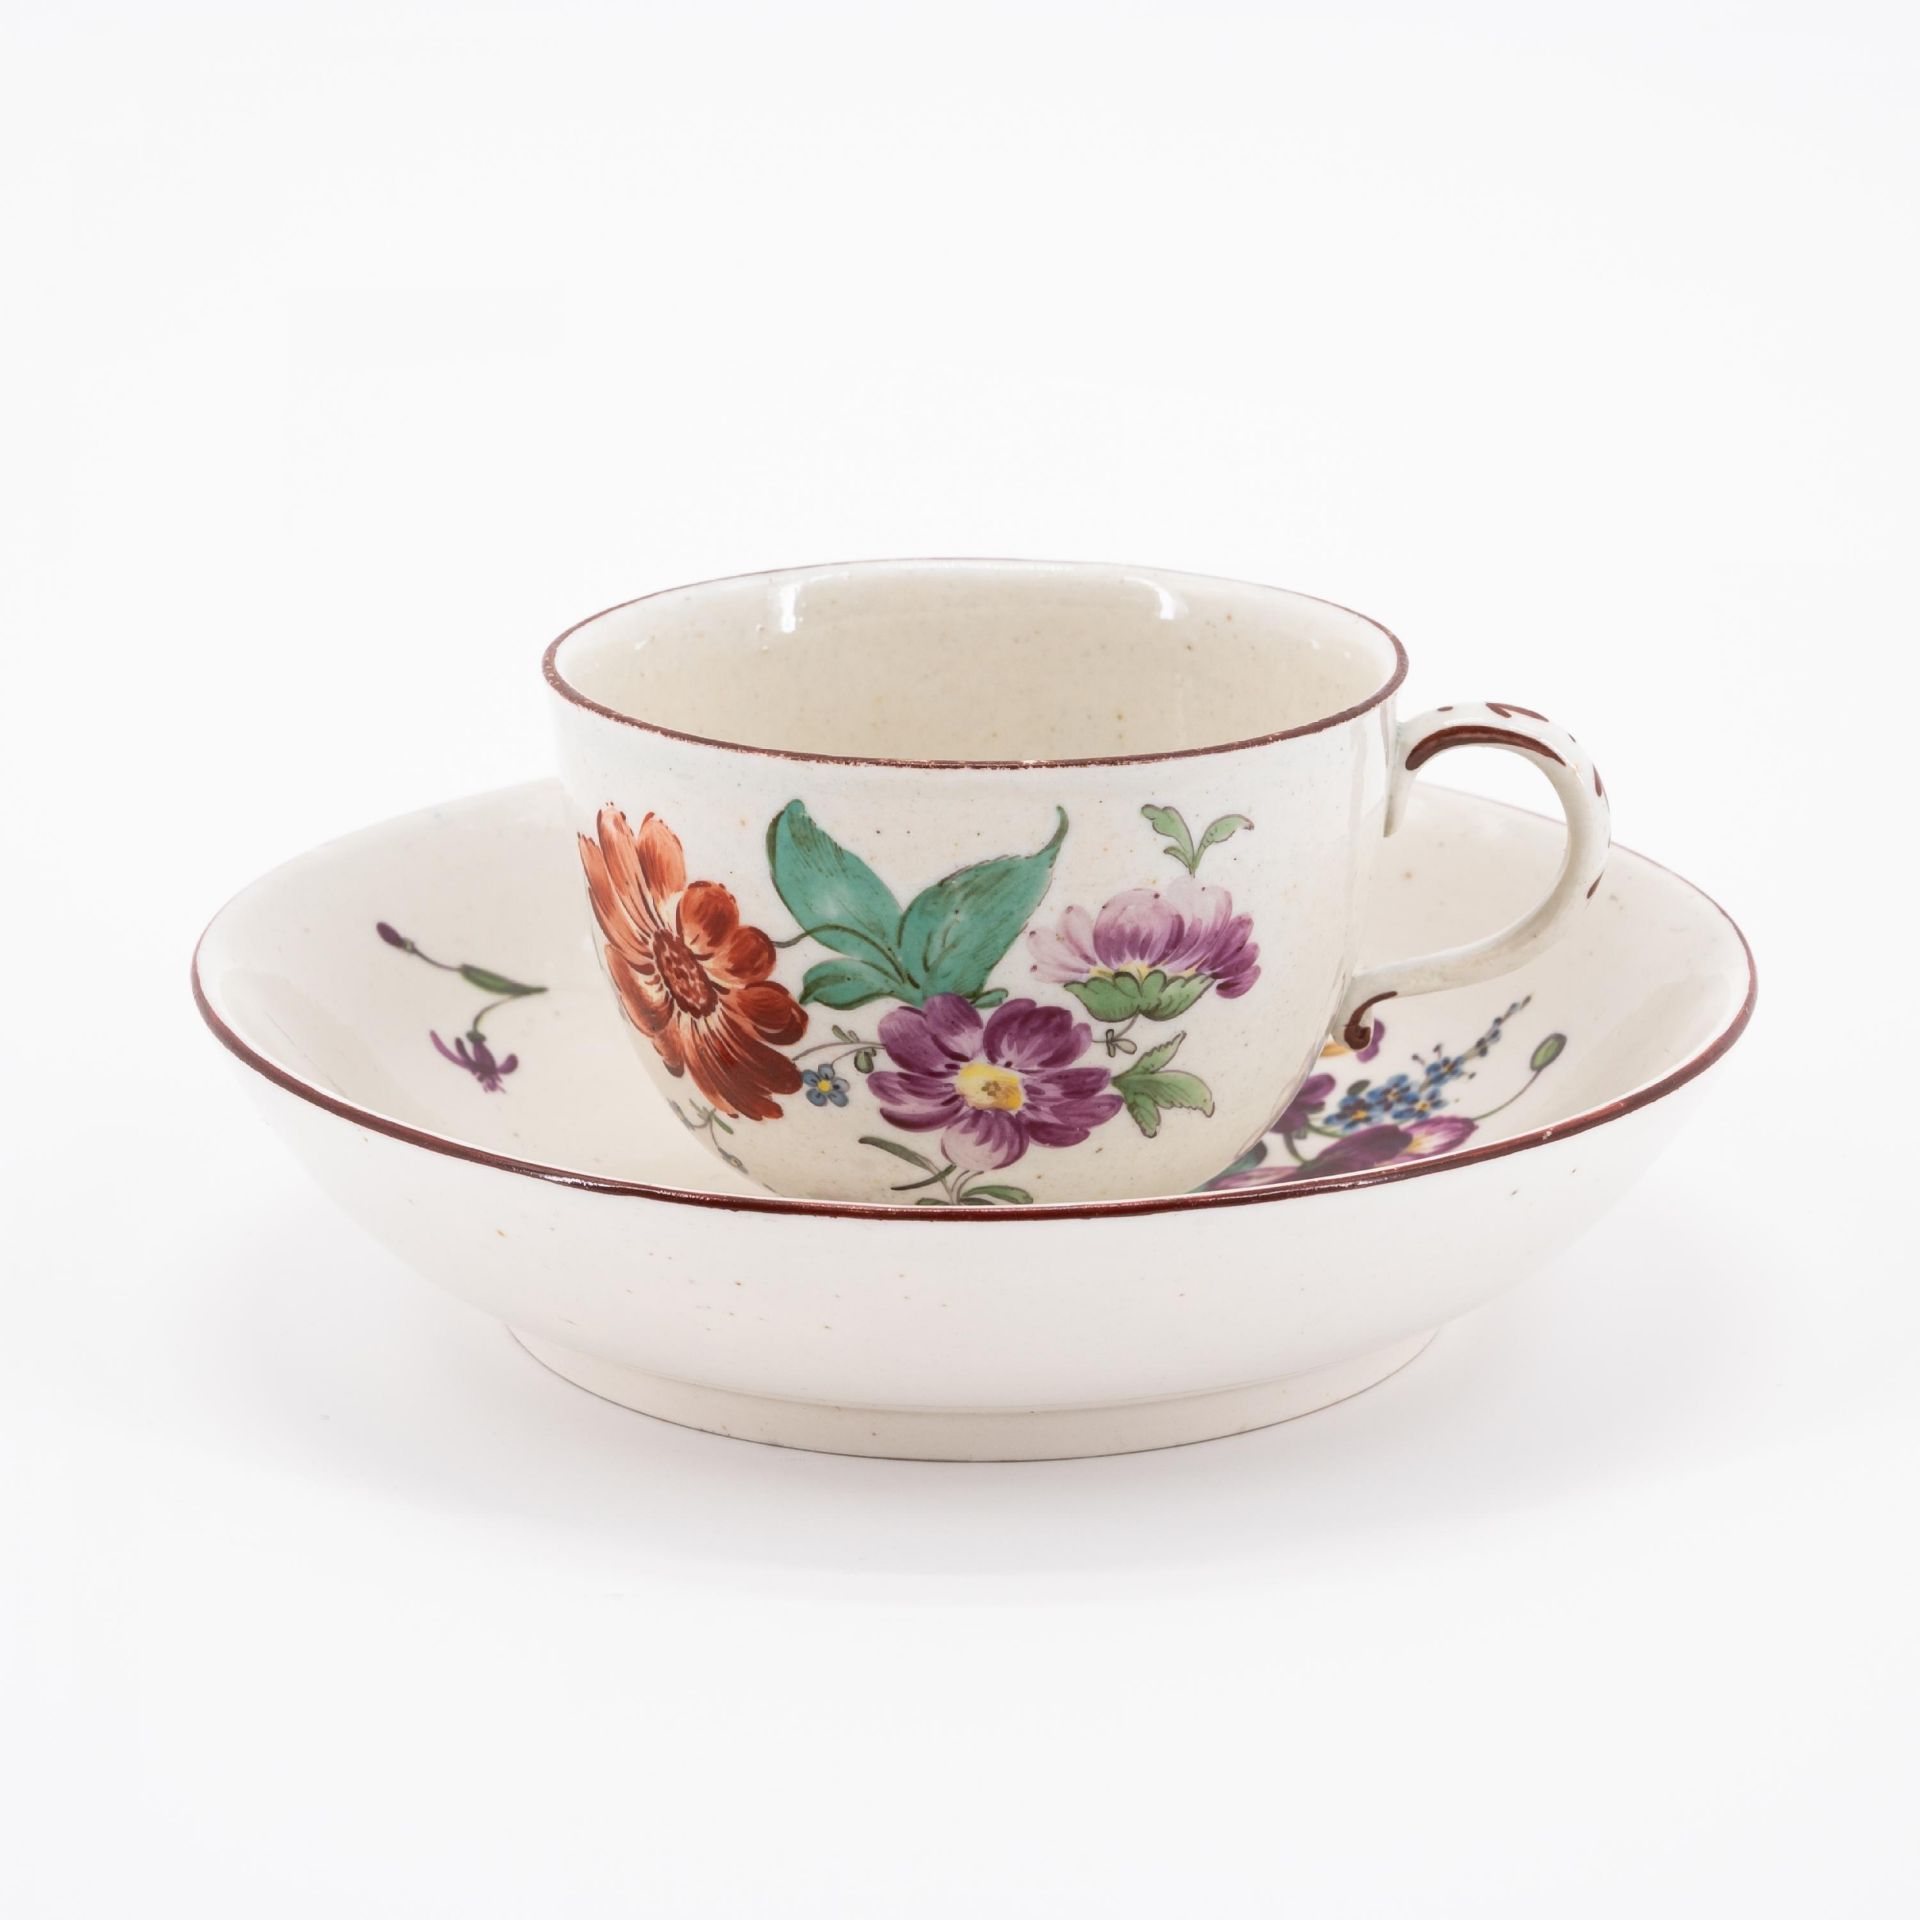 SIX PORCELAIN CUPS AND THREE SAUCERS WITH BIRD DECOR, FLOWERS AND LANDSCAPE SCENES - Image 12 of 16